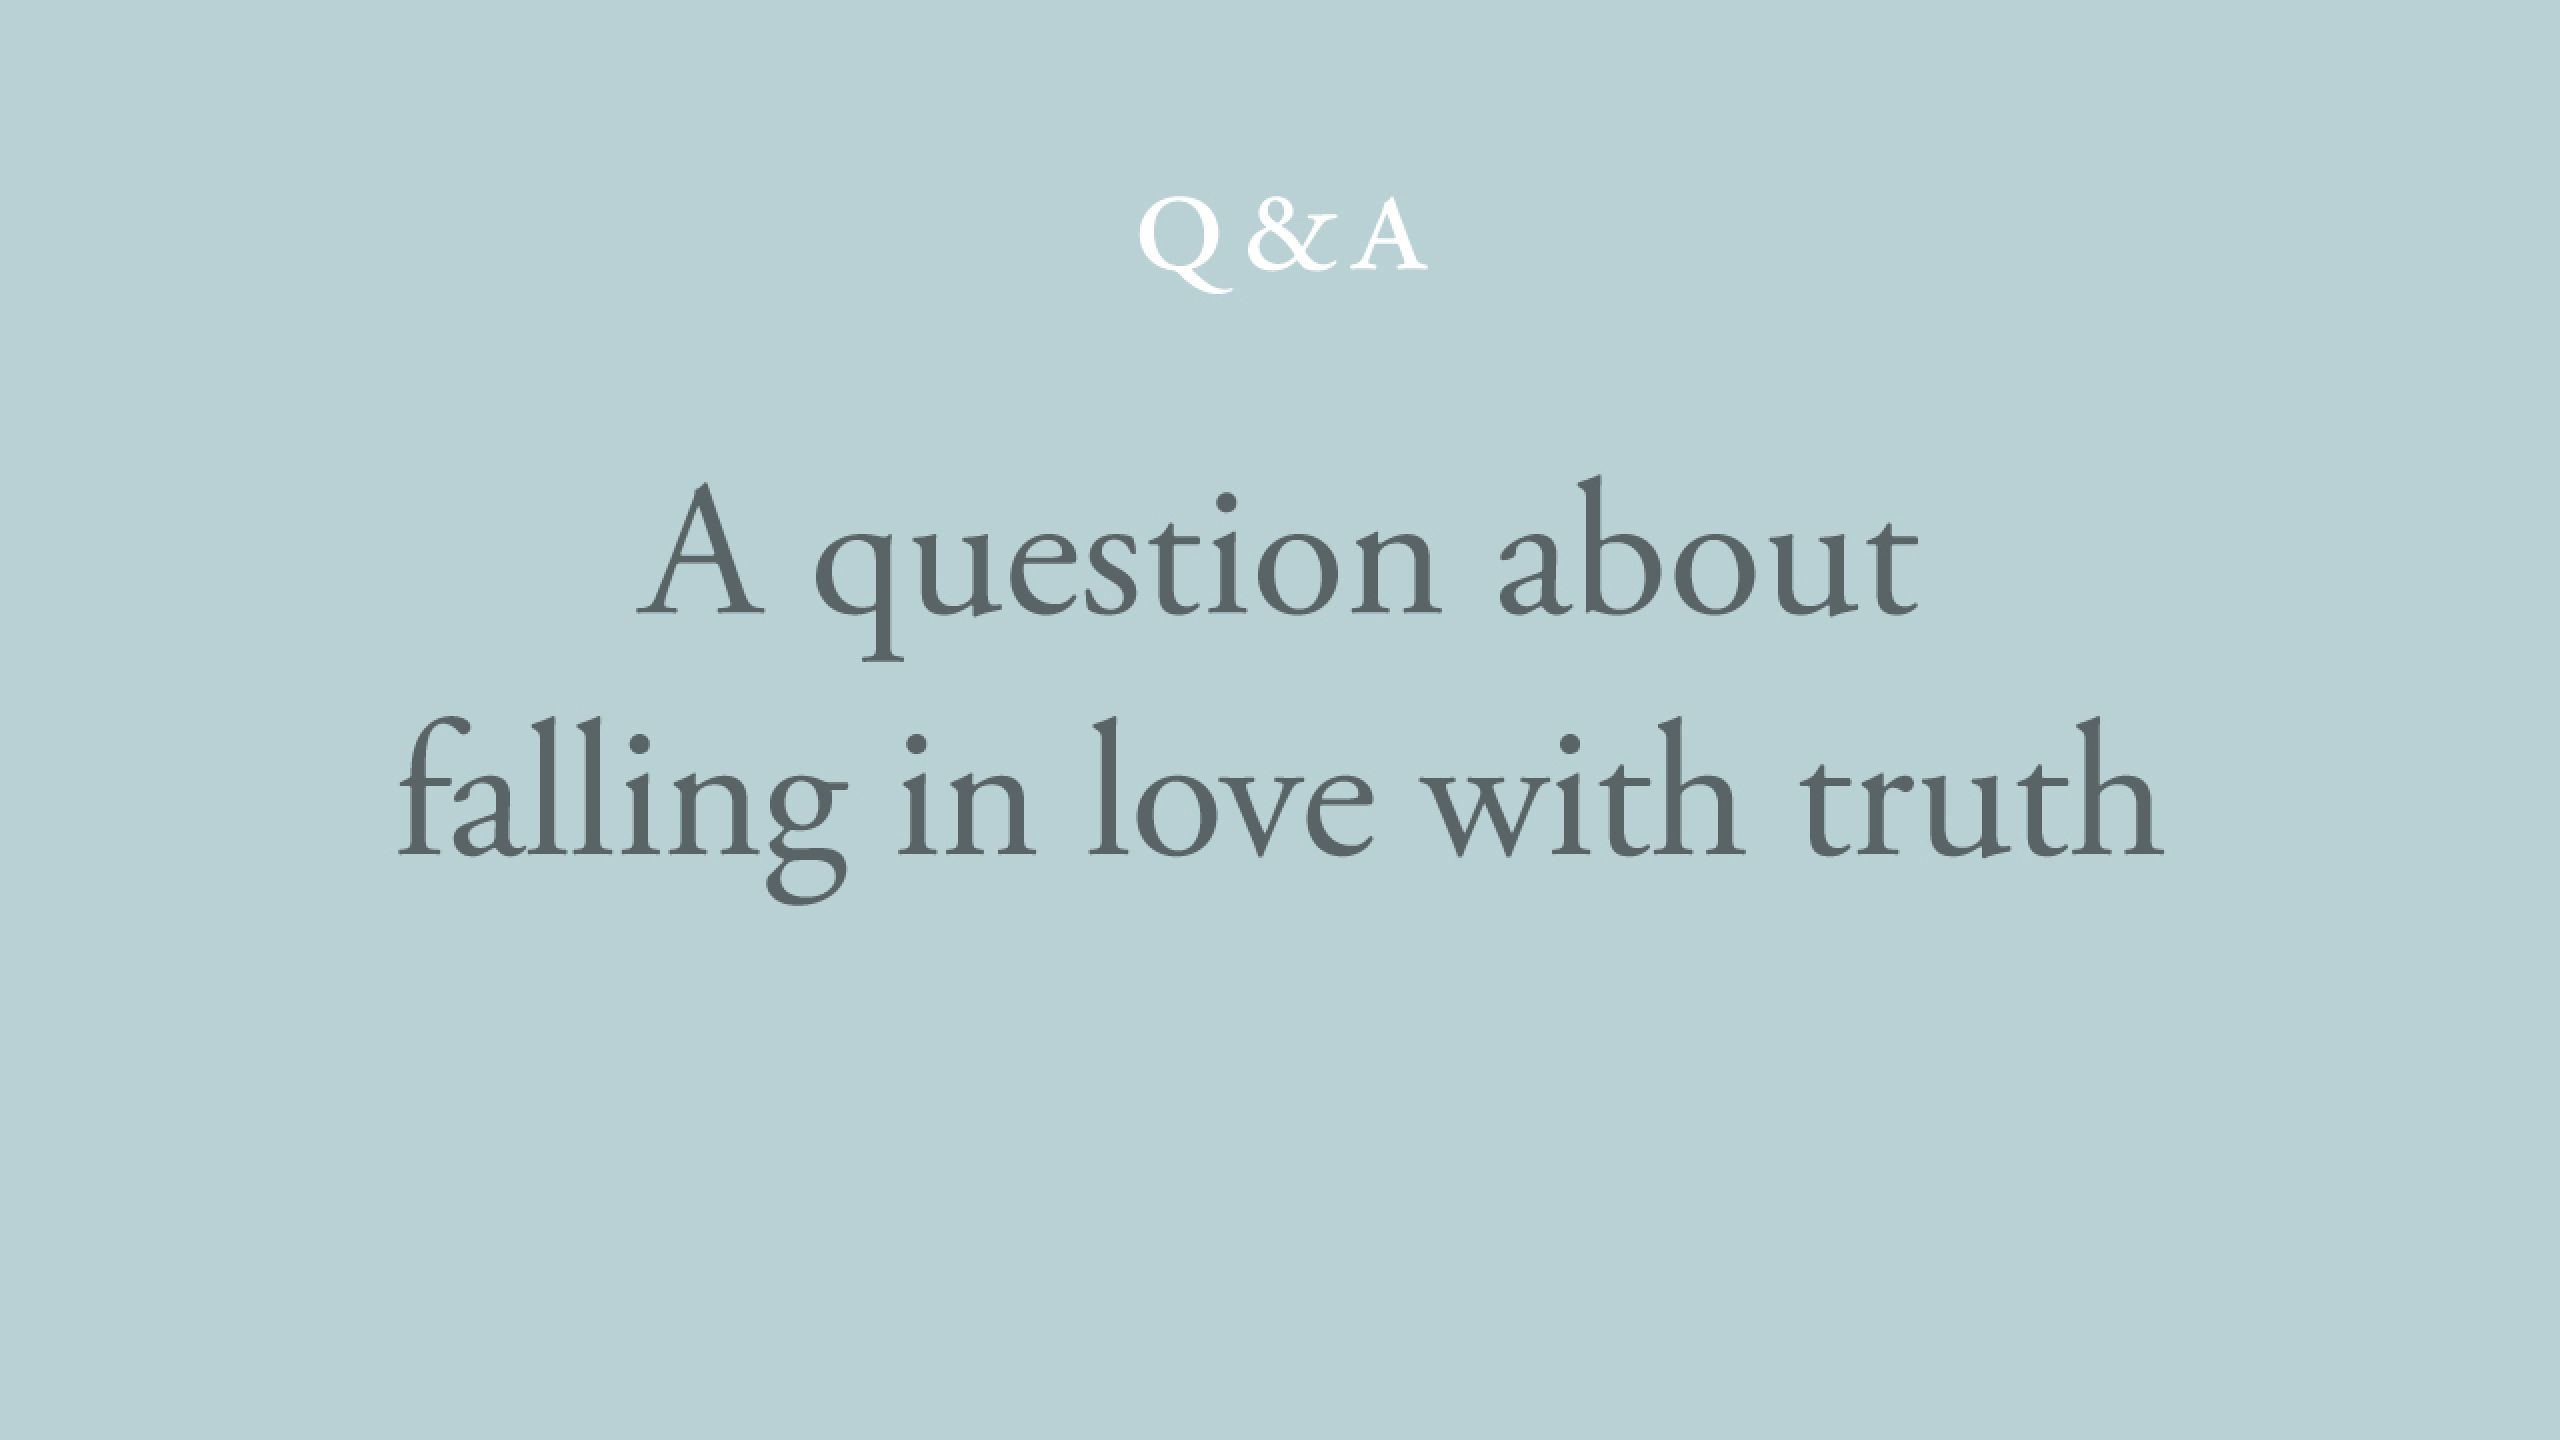 How can I fall more deeply in love with truth?